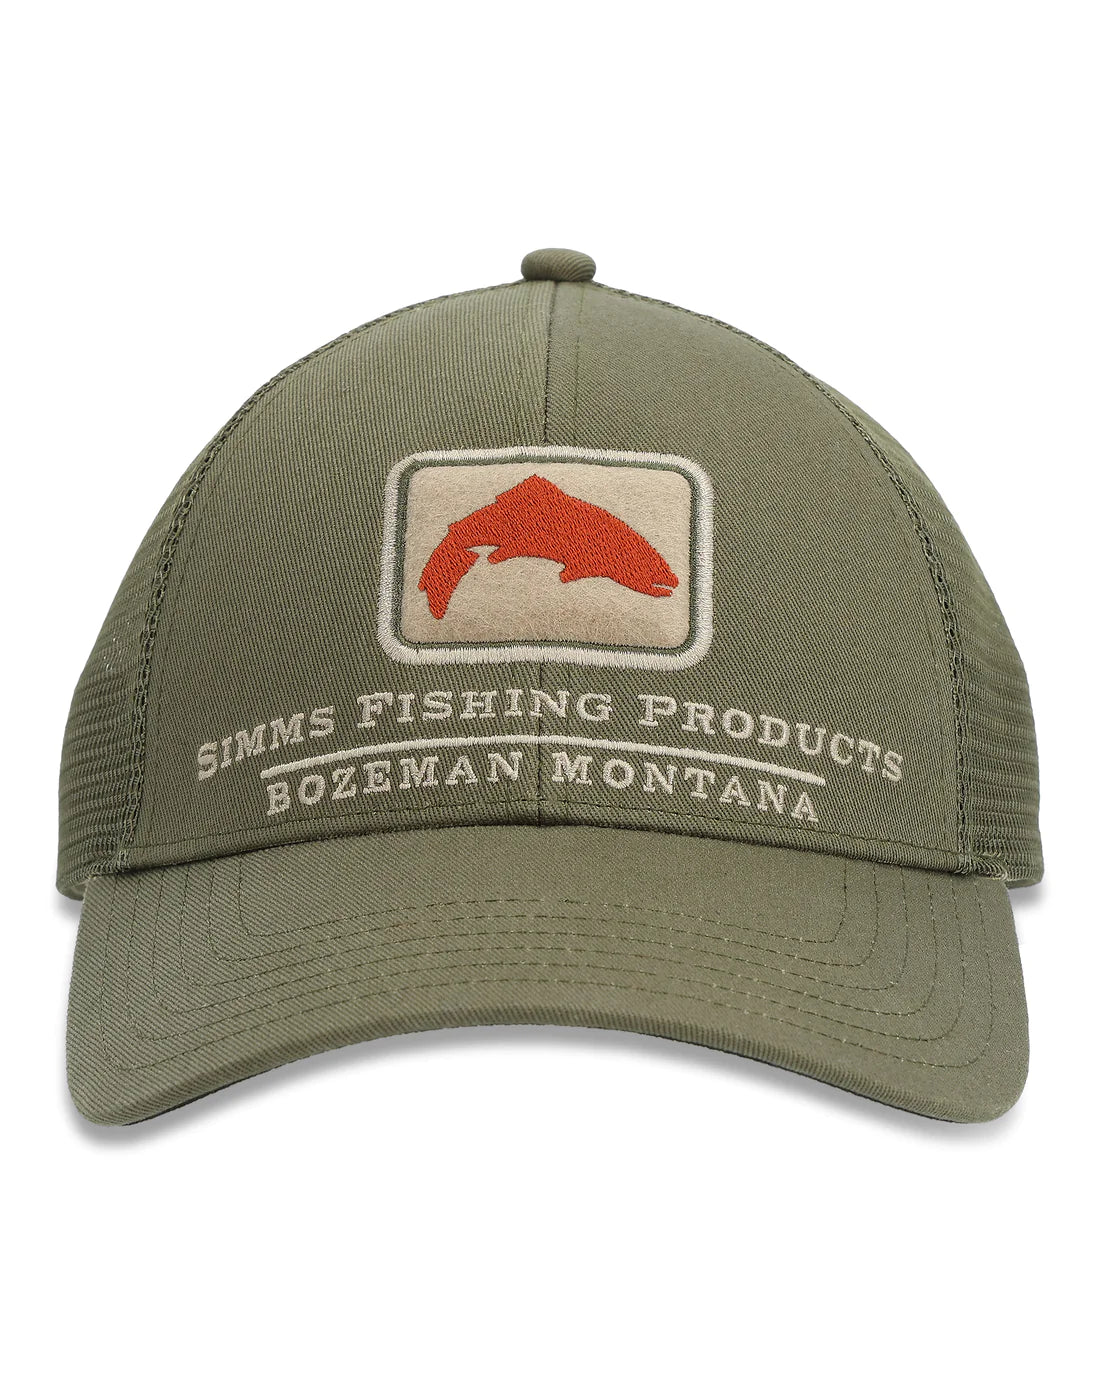 Simms Trout Icon Trucker - OSFM / RIFFLE GREEN - Mansfield Hunting & Fishing - Products to prepare for Corona Virus